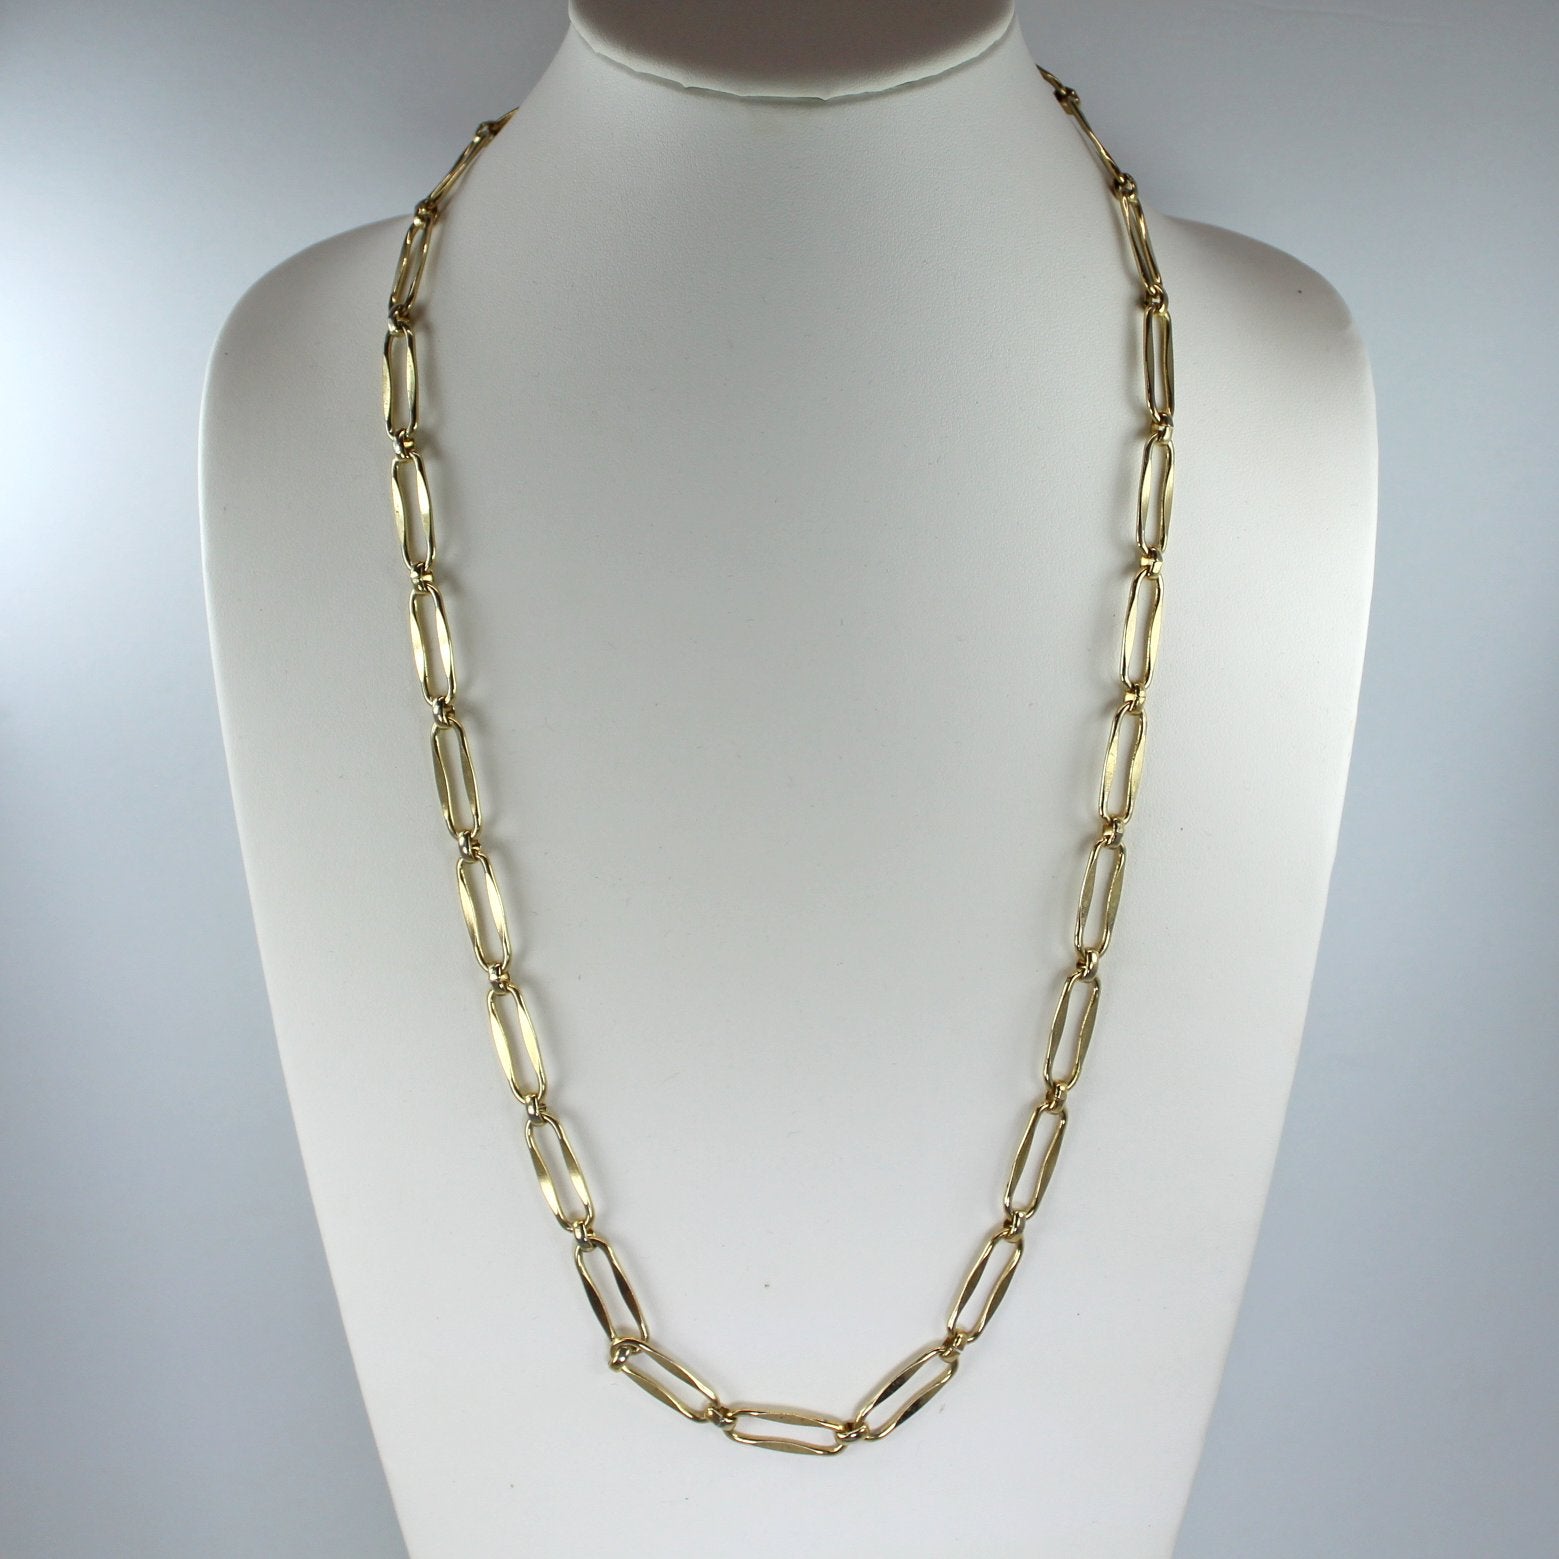 Two Napier Vintage Necklaces 30" Mod Oval Long Links 16" Pearl Gold Chain Woven modern view long oval link chain